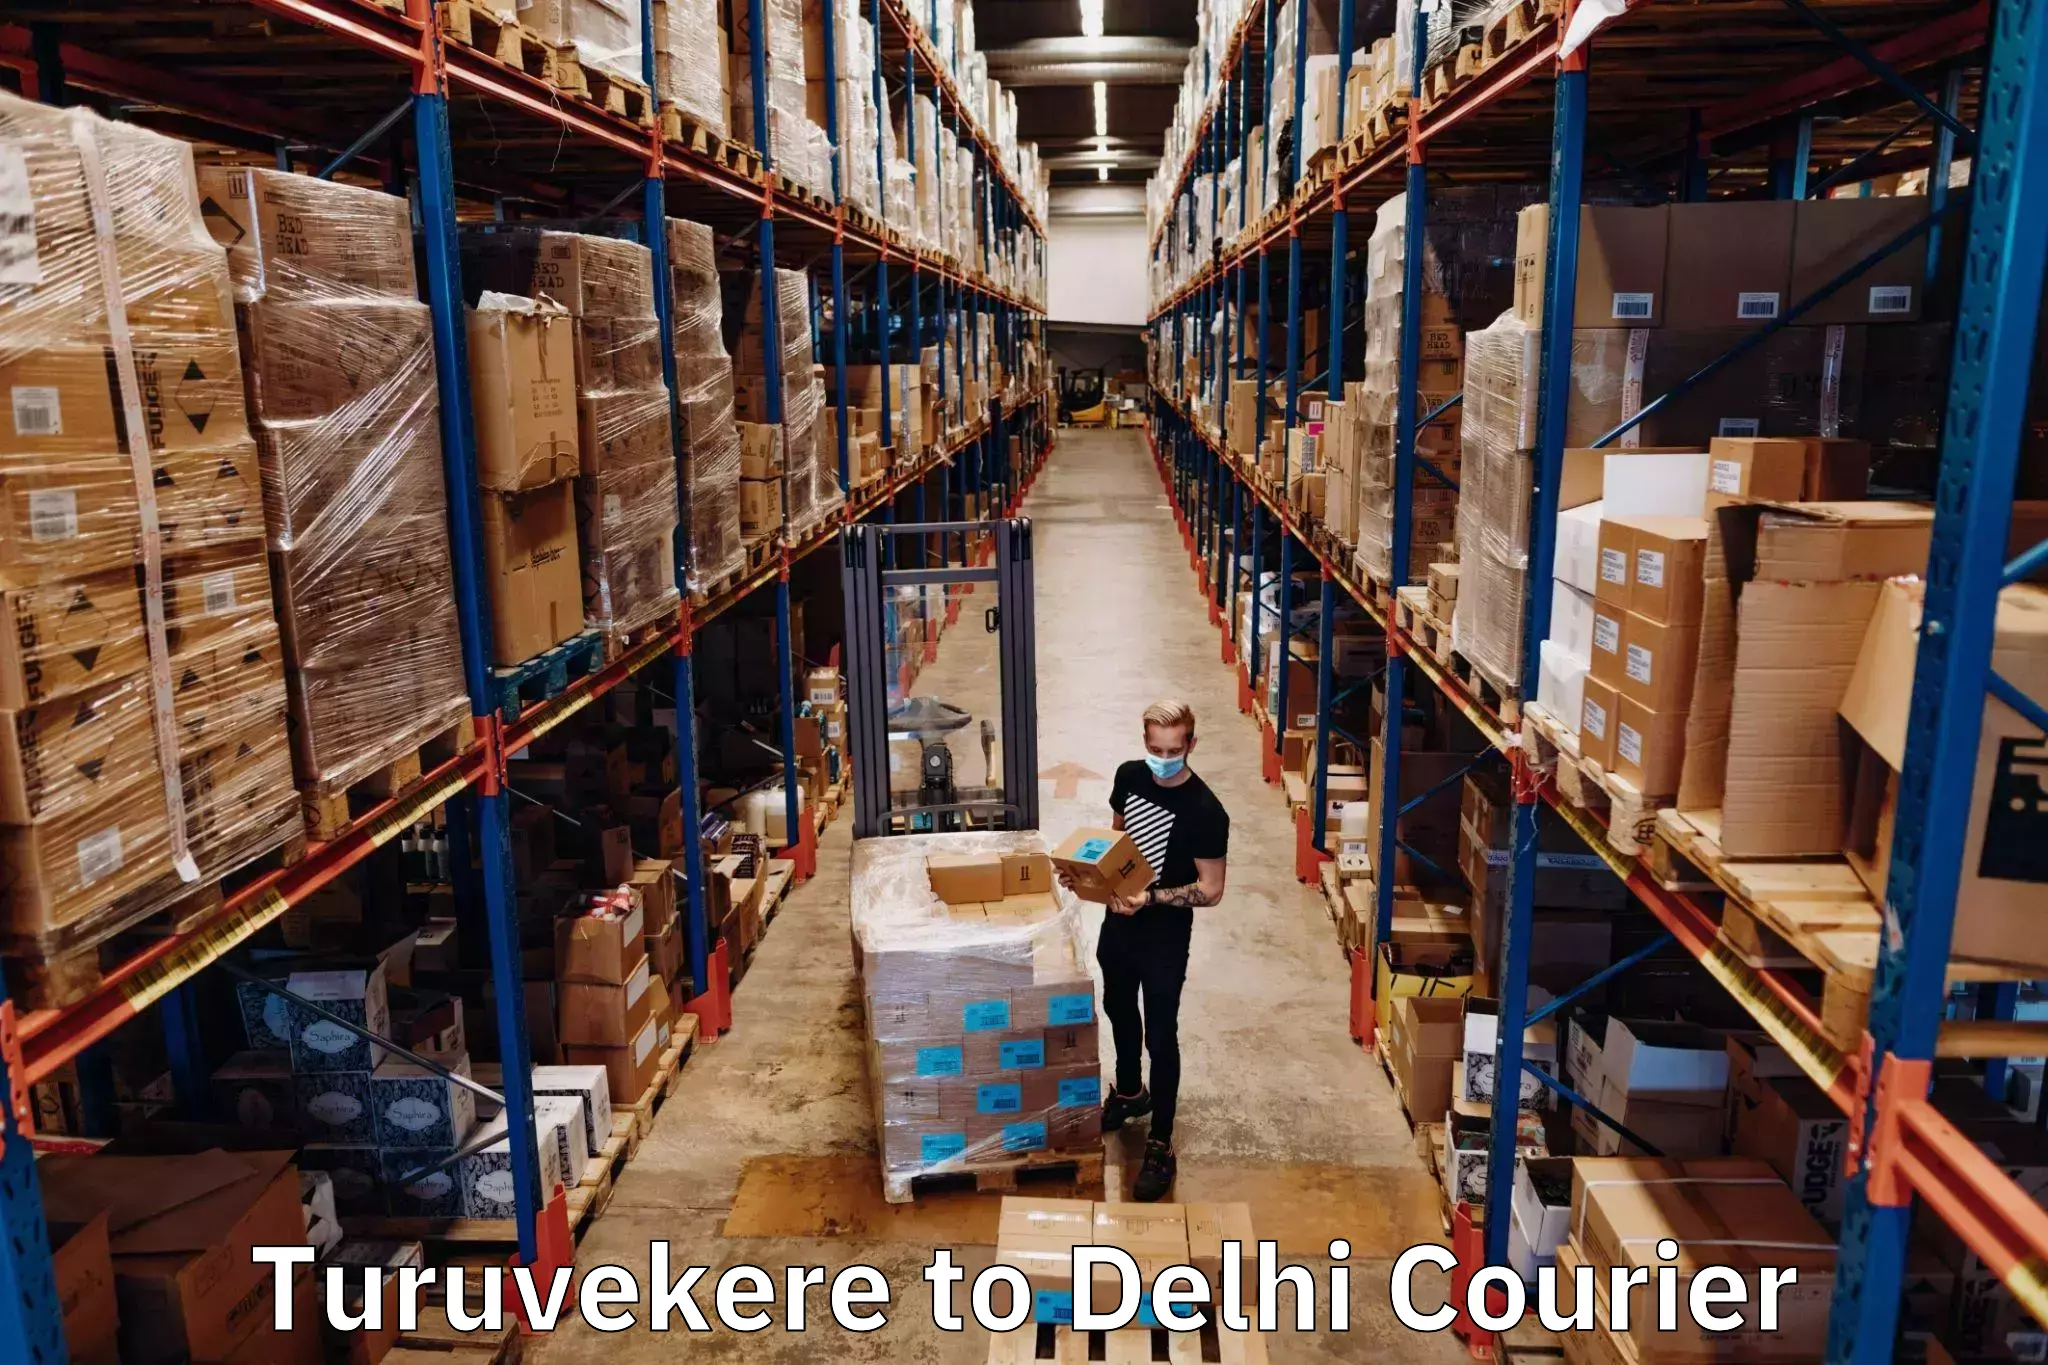 Cash on delivery service Turuvekere to Delhi